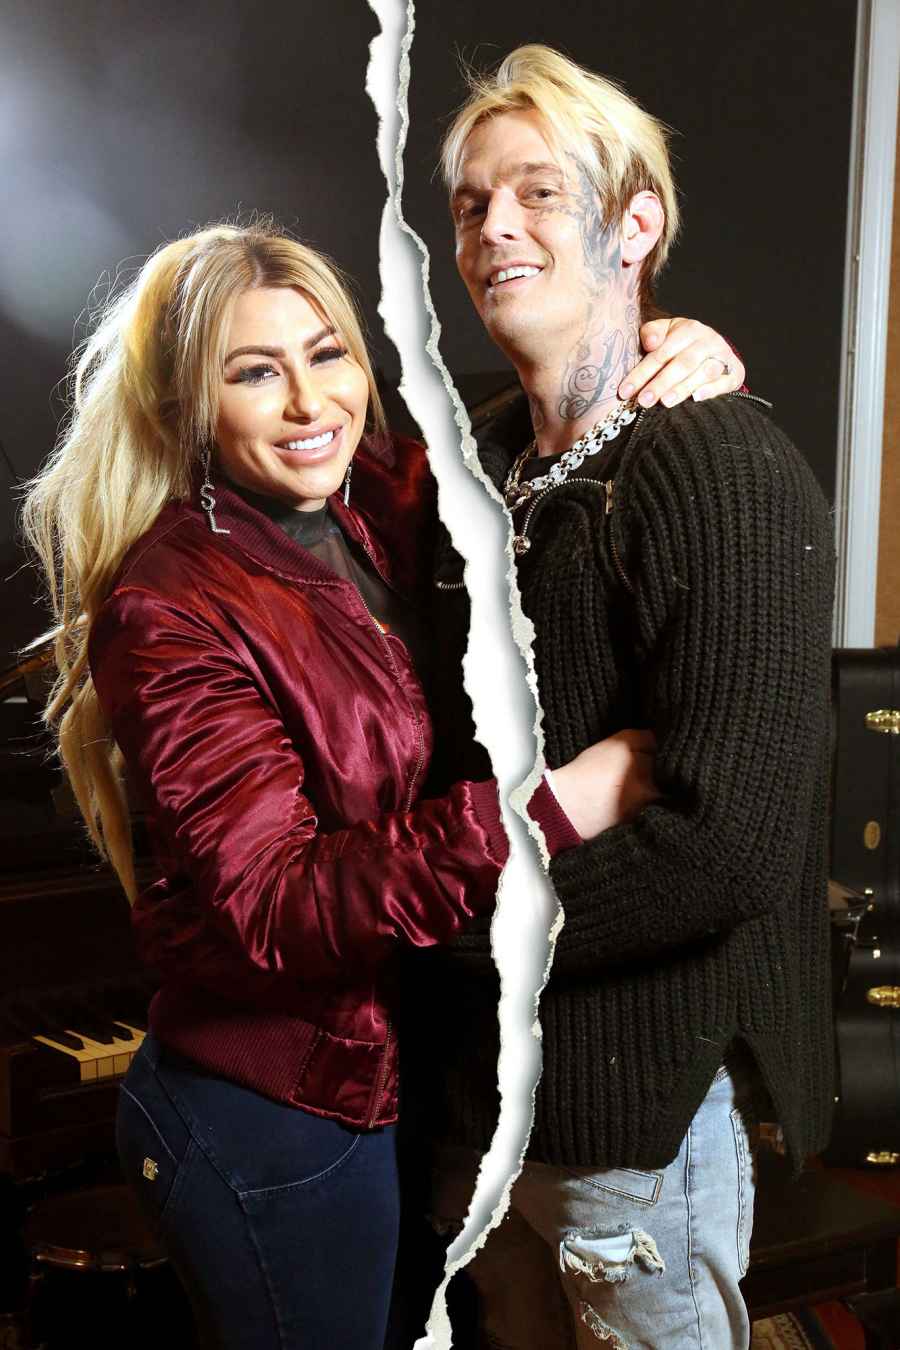 Aaron Carter and Melanie Martin’s Ups and Downs